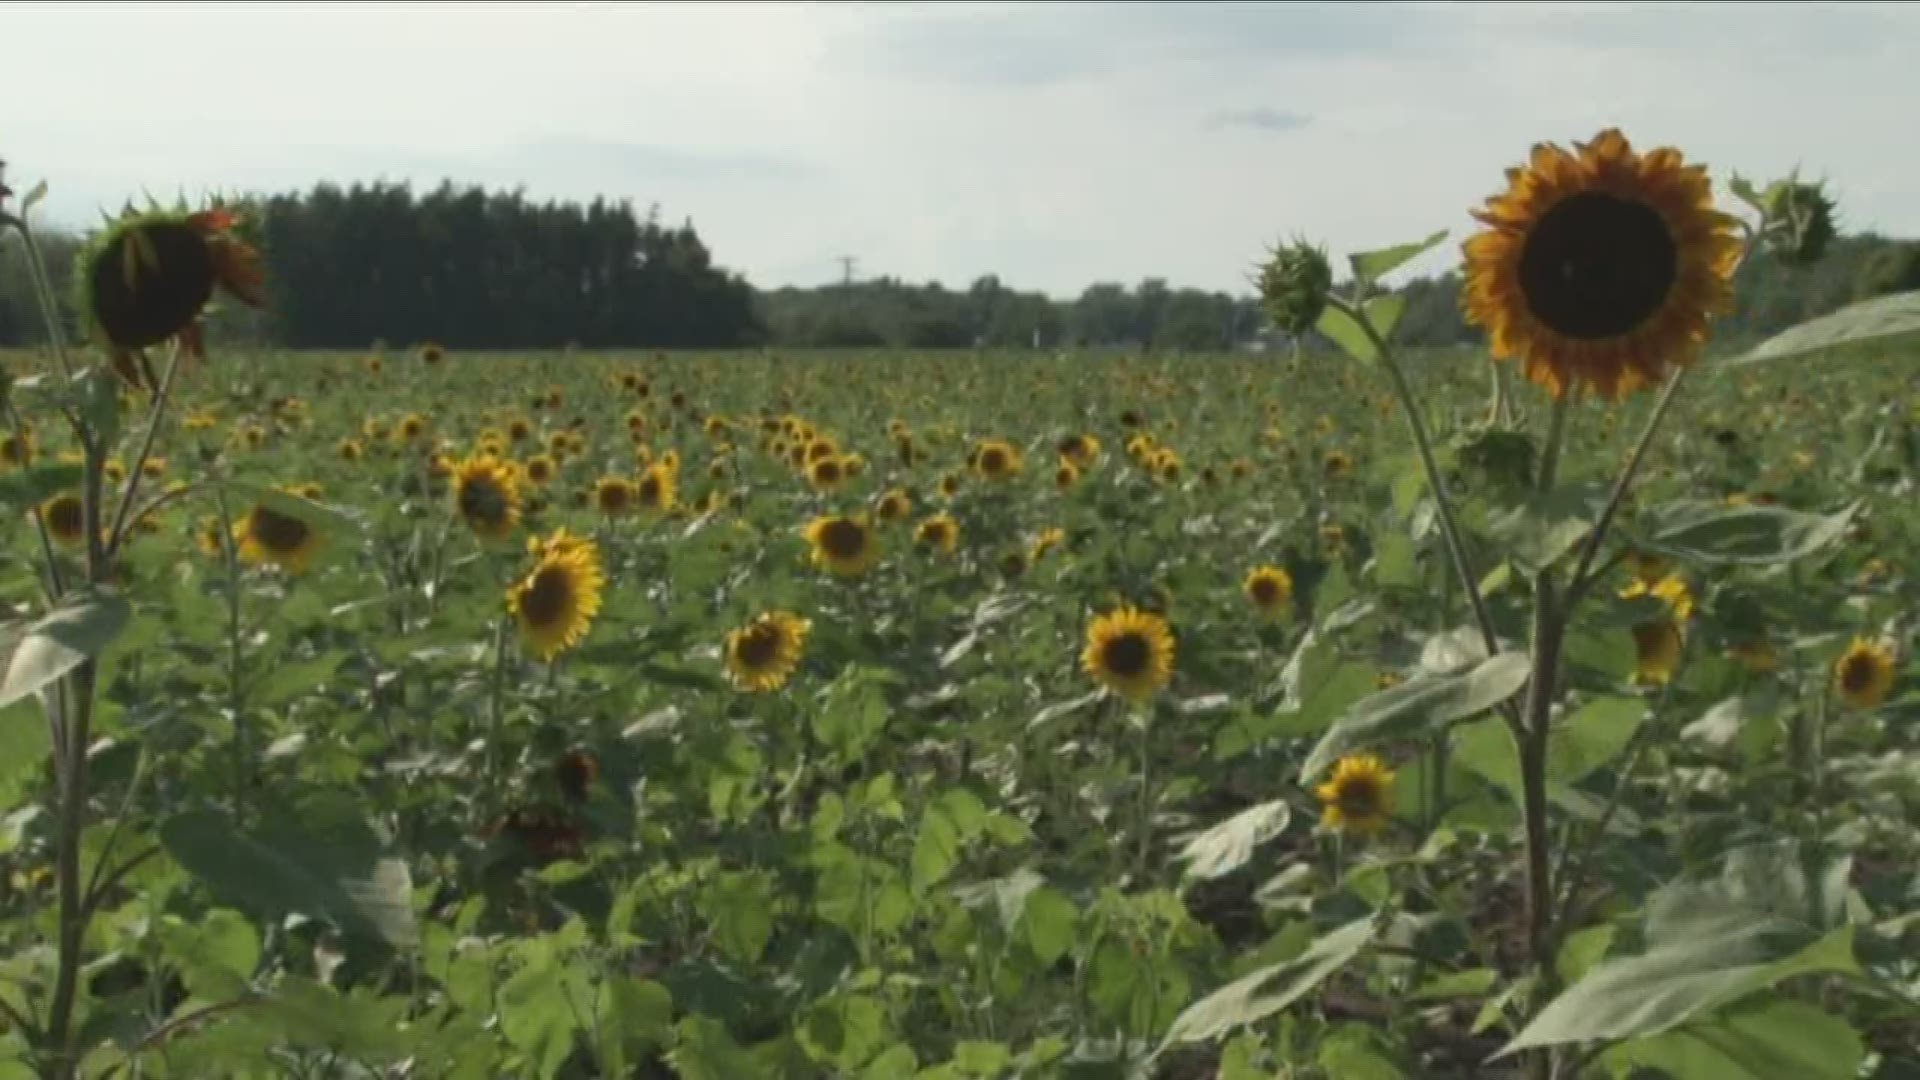 Sunflowers of Sanborn was broken into overnight and vandalized.